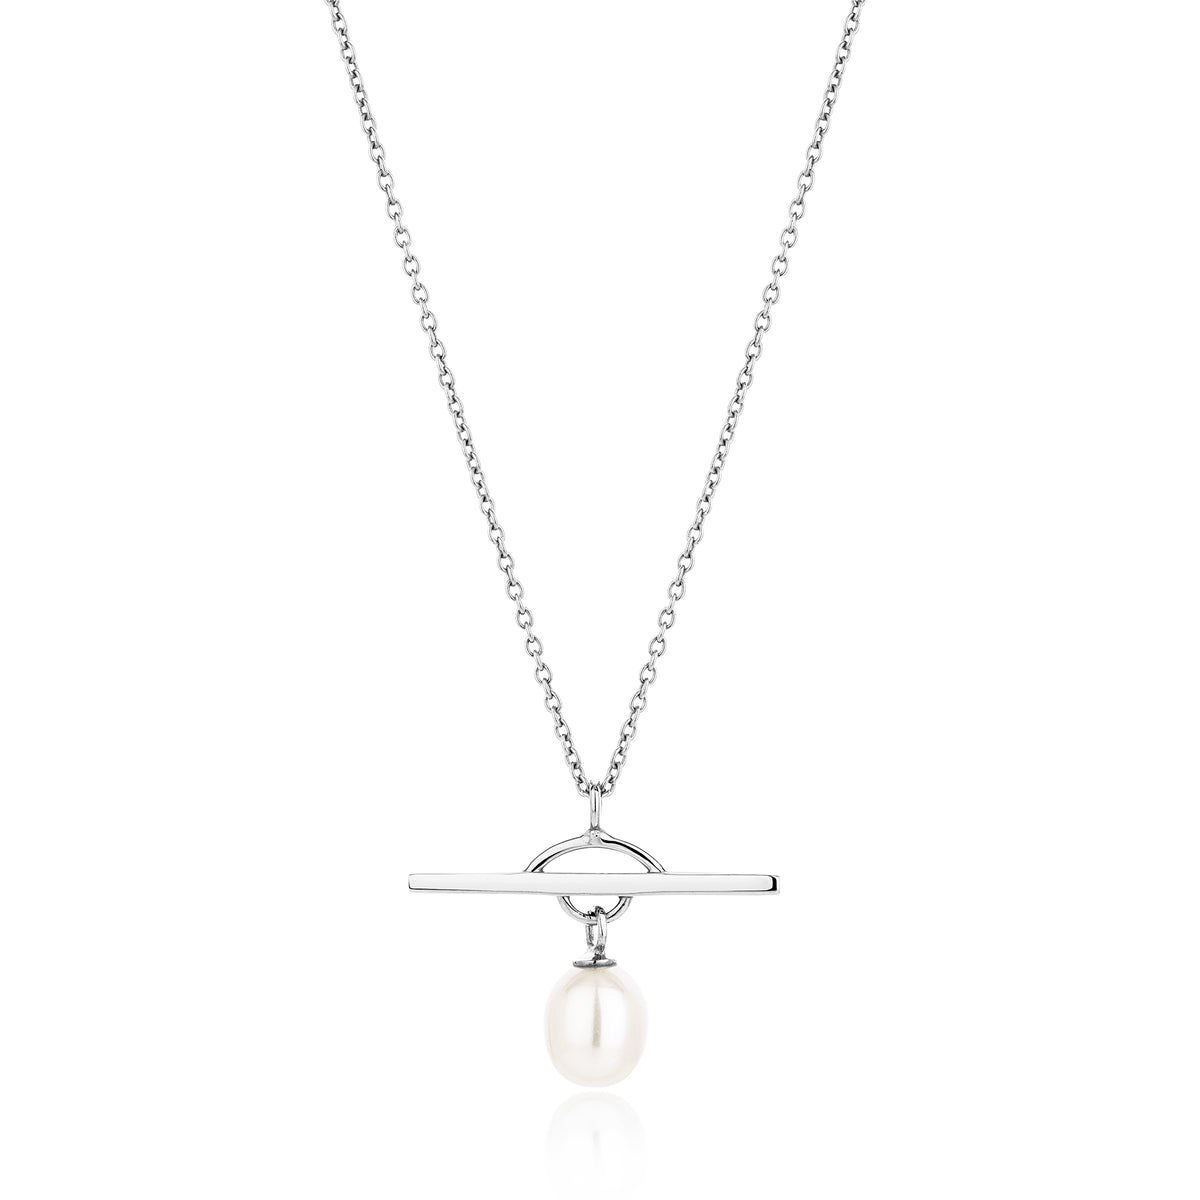 Sterling silver necklace with a pearl charm